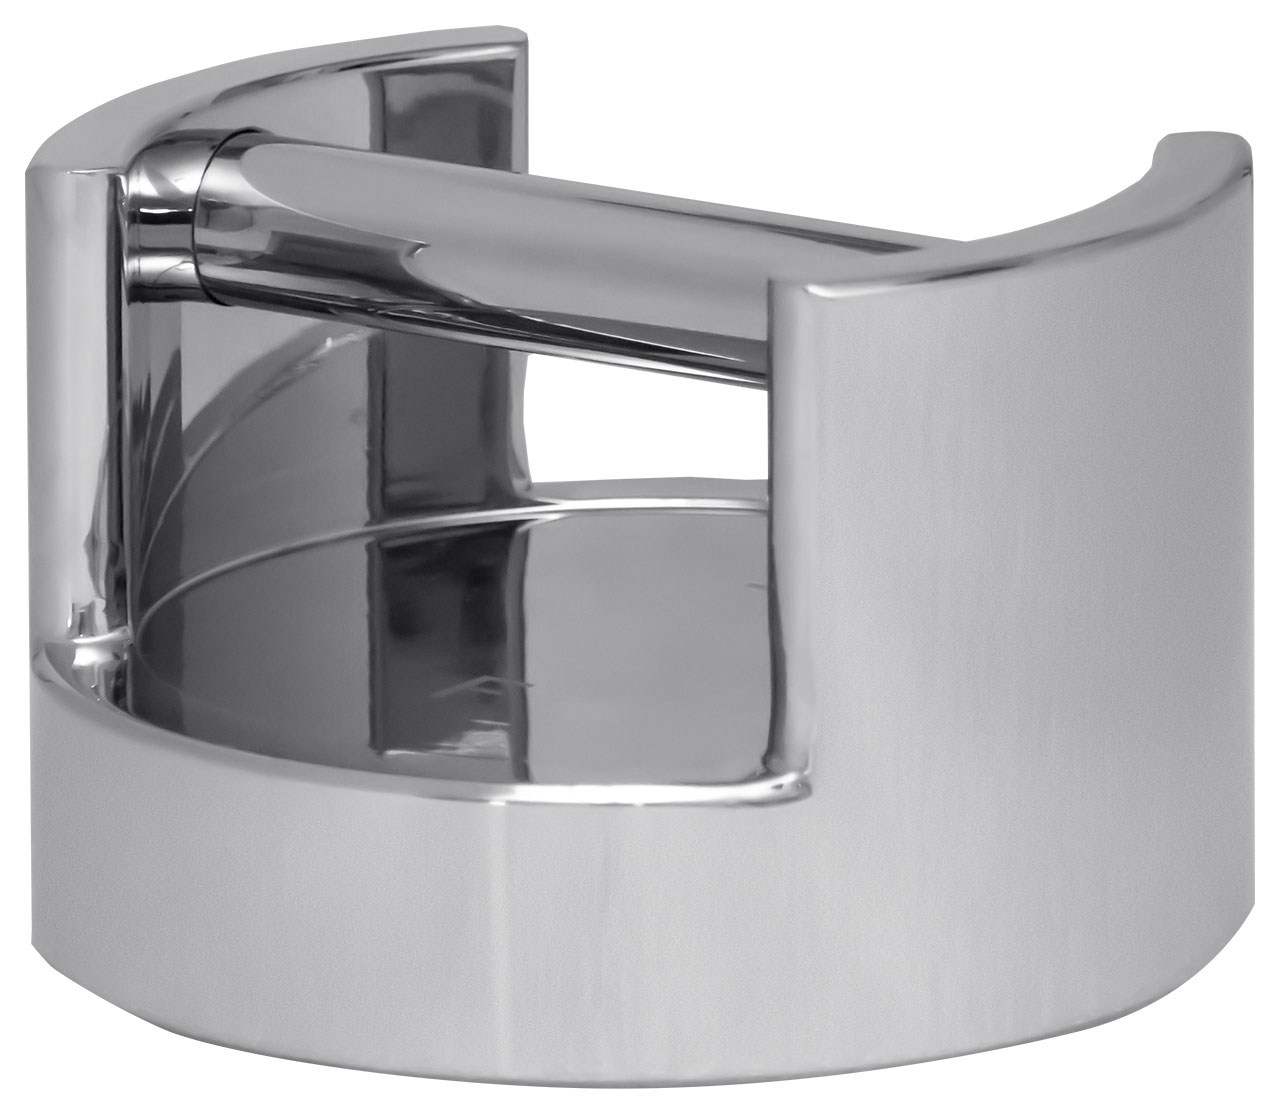 F1 Control weight, mirror-polished stainless steel, stackable